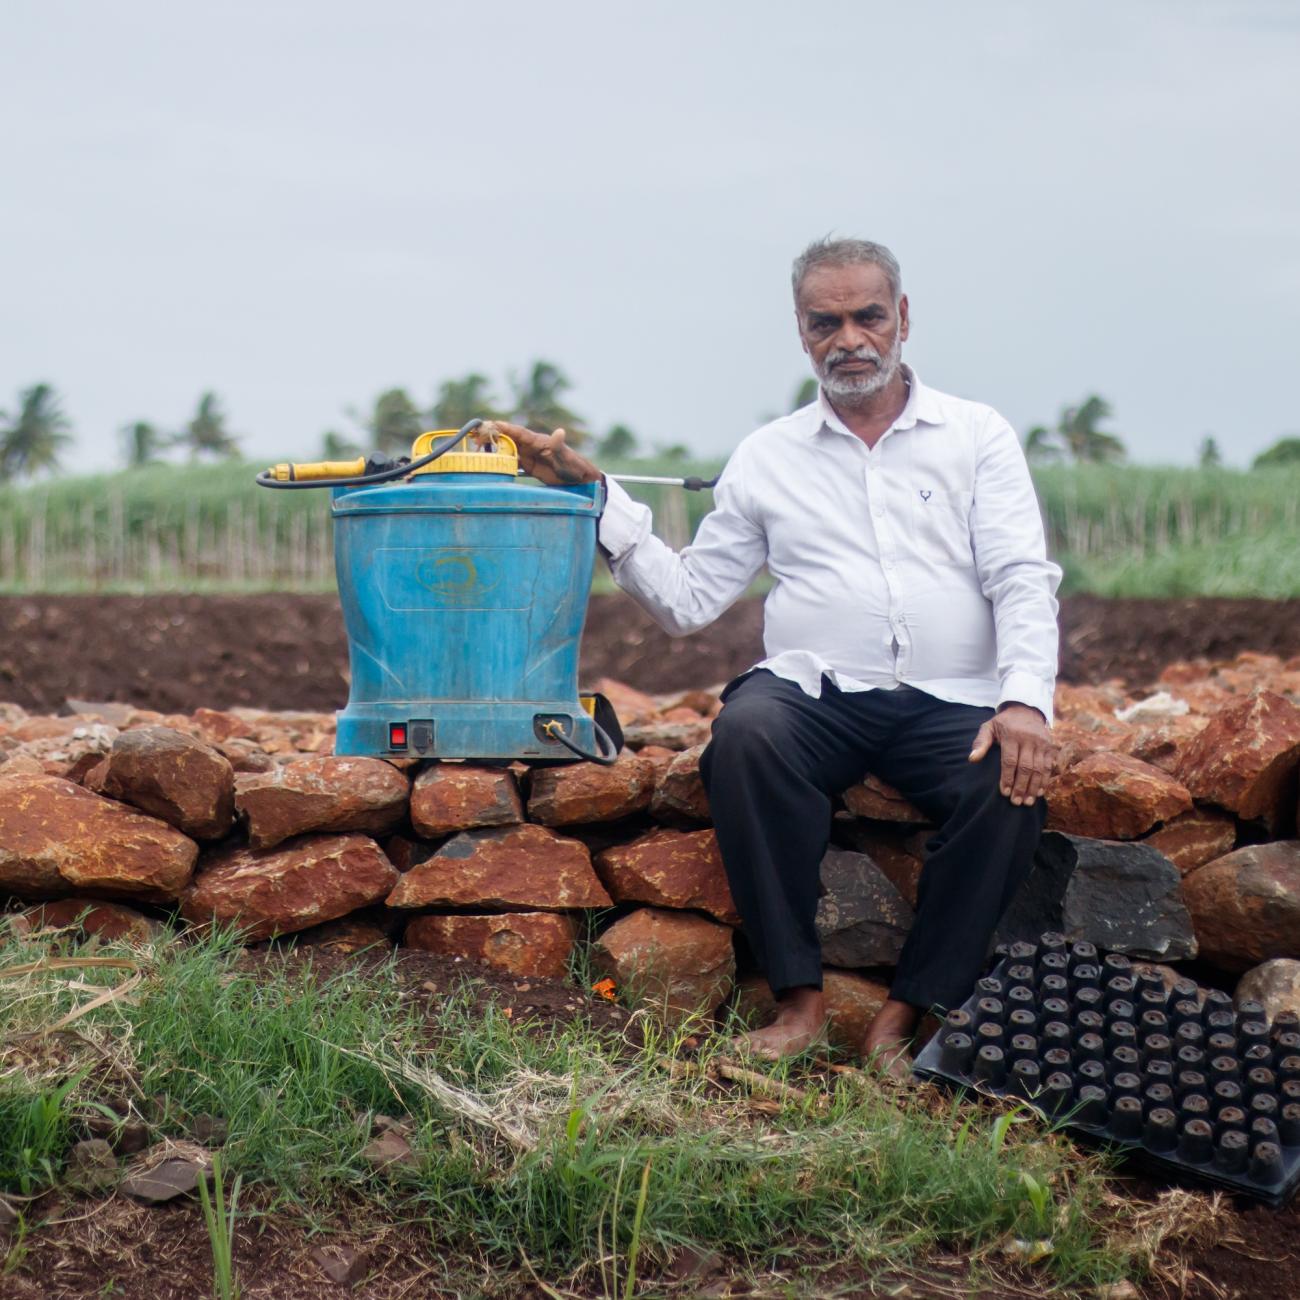 Farmer and agrochemical worker Annasso More was diagnosed with peripheral neuropathy because of overexposure to toxins, making it difficult for him to walk. 